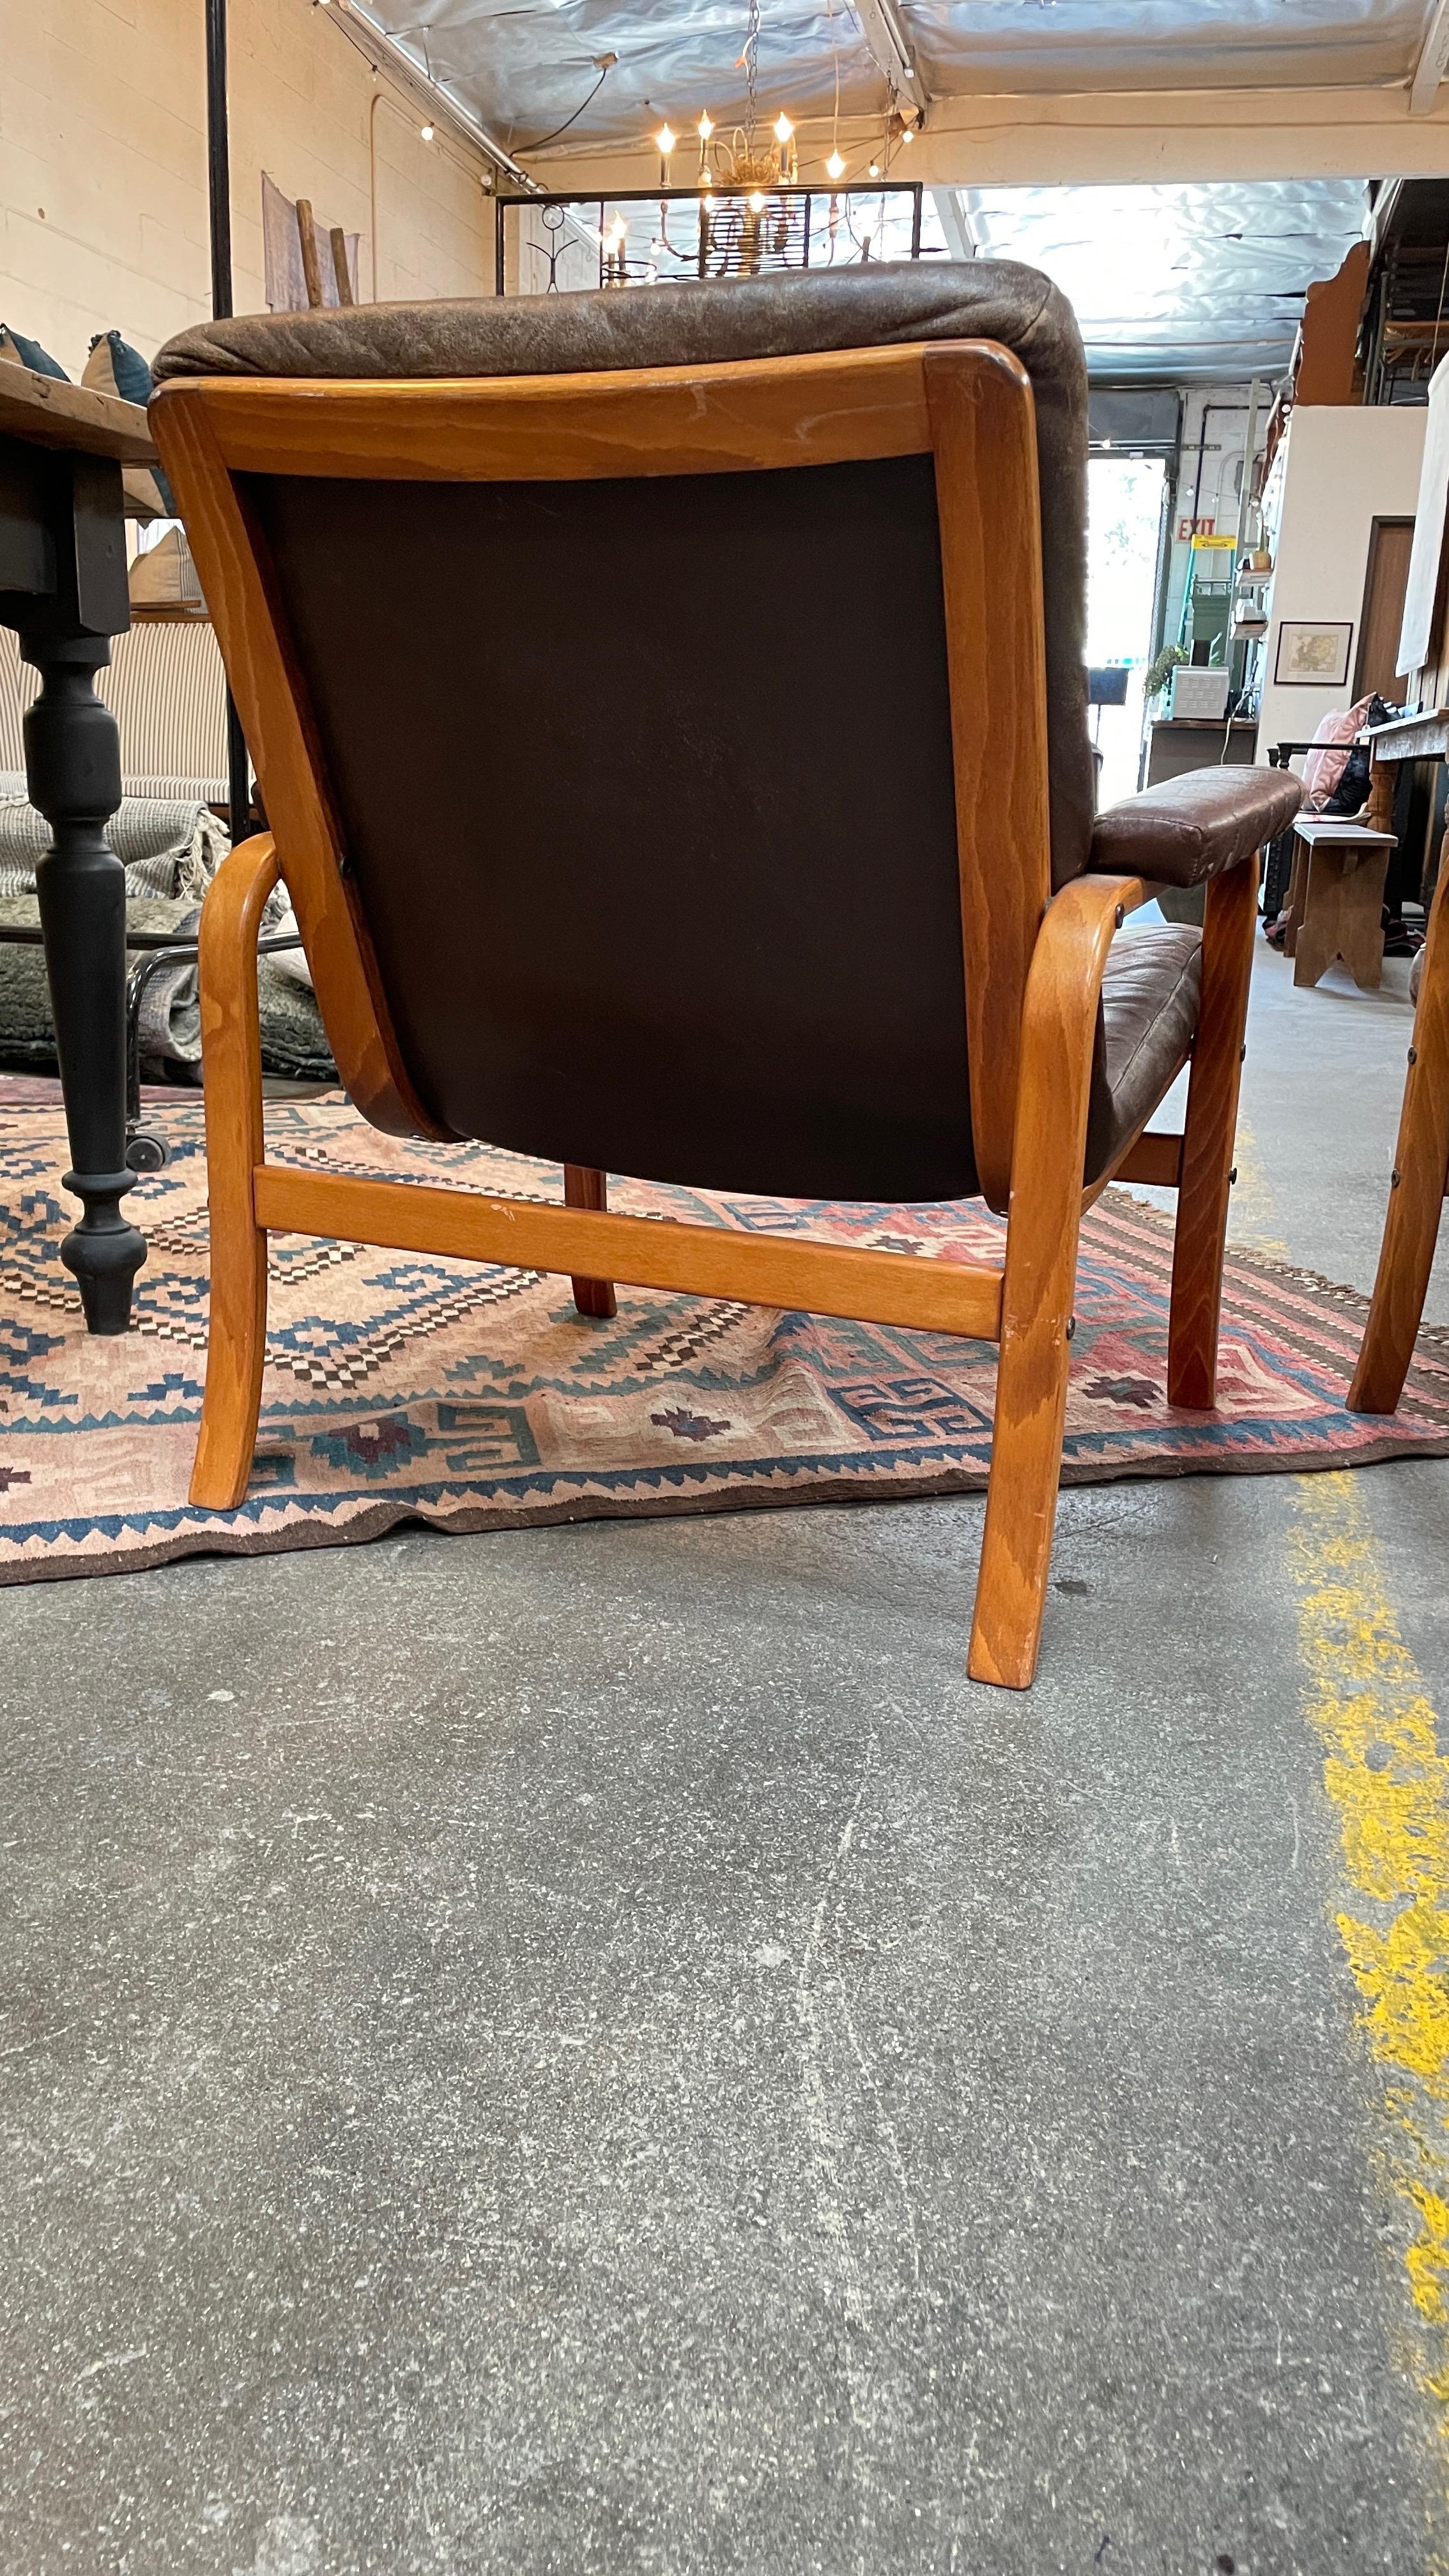 This amazing pair of Swedish Göte Möbler Nässjö leather chairs are everything you could want in vintage leather chairs. The perfect amount of distressing but still completely functional! 

The pair of Swedish Gote Movler leather chairs sit at 28